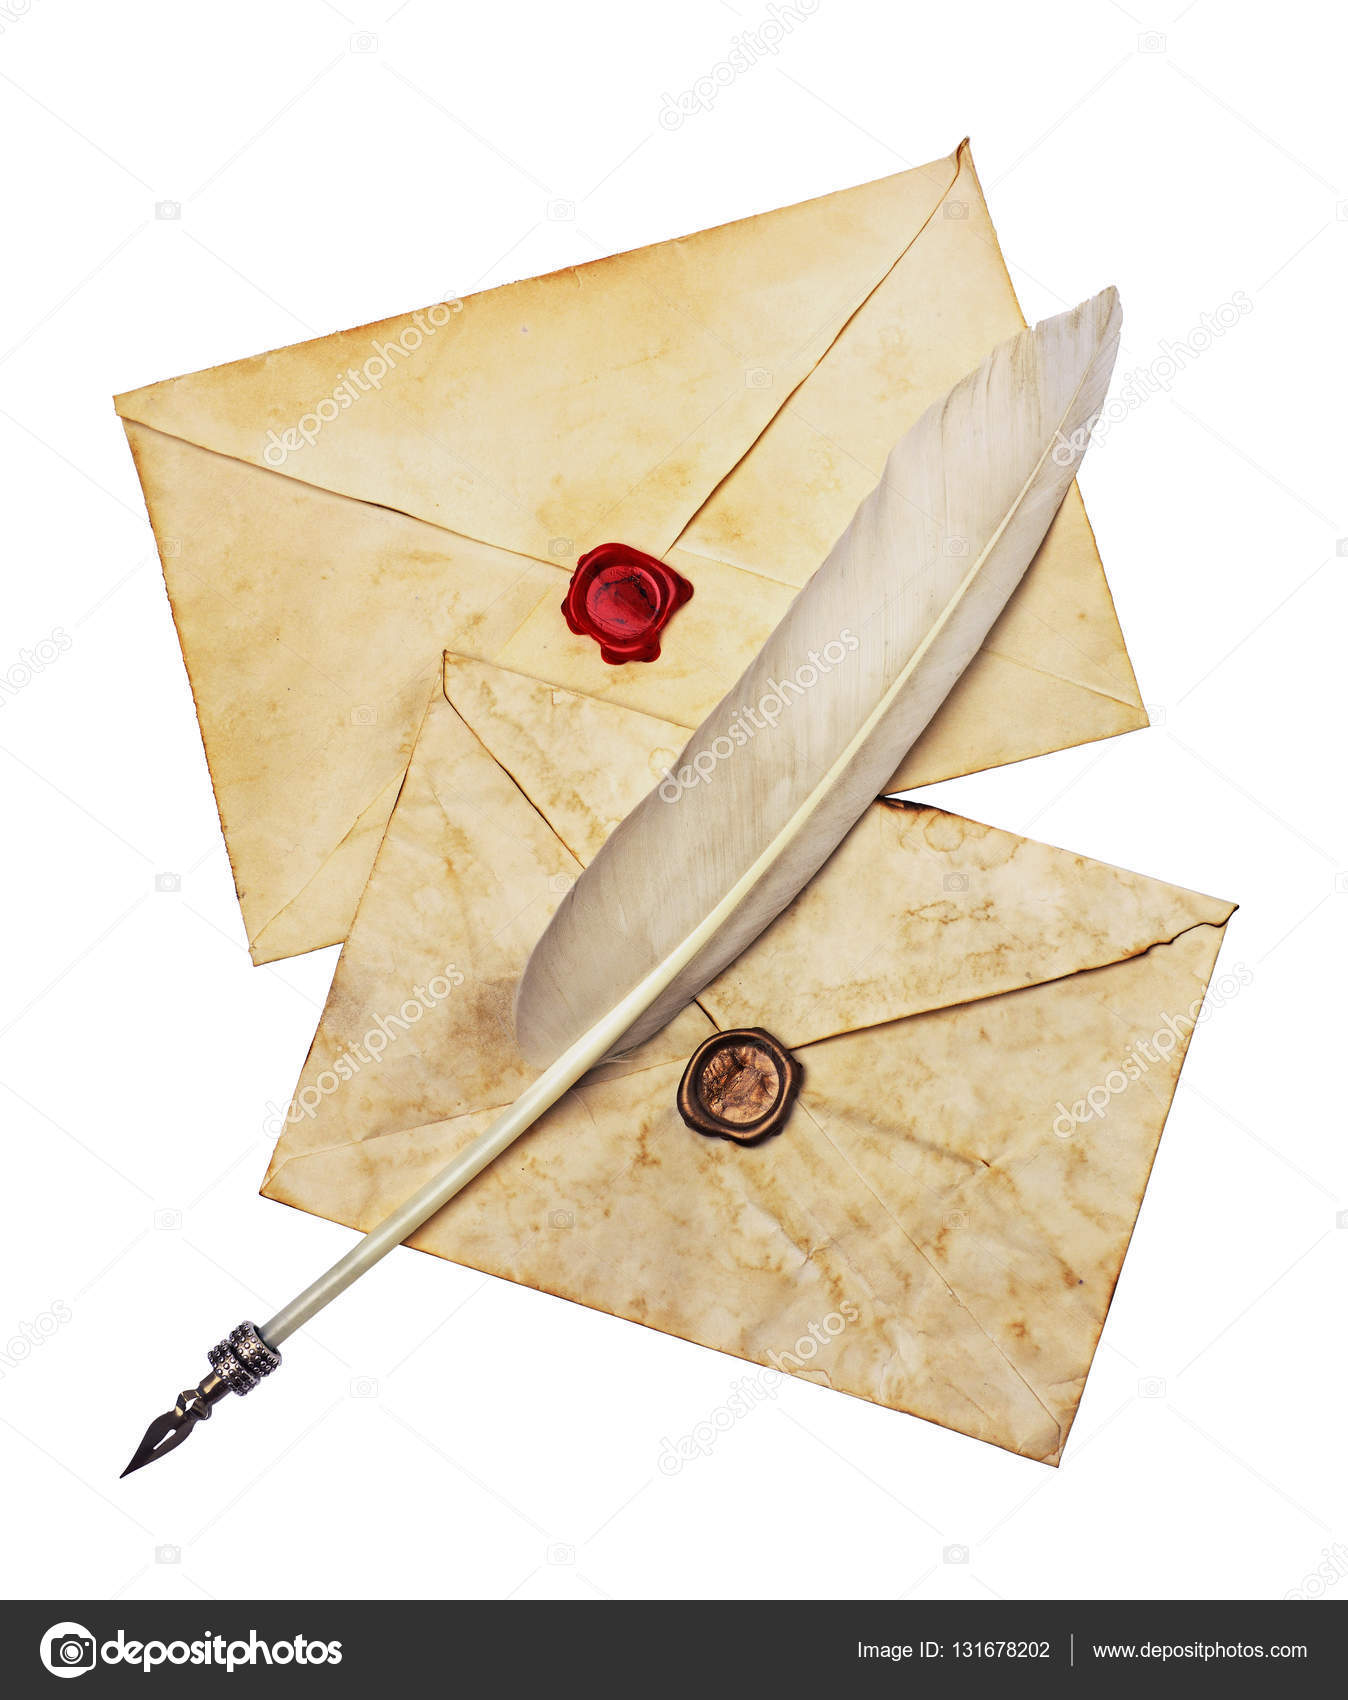 Los Vergelijken sla Two old envelopes with red and brown seal wax and feather pen Stock Photo  by ©viktoriya89 131678202